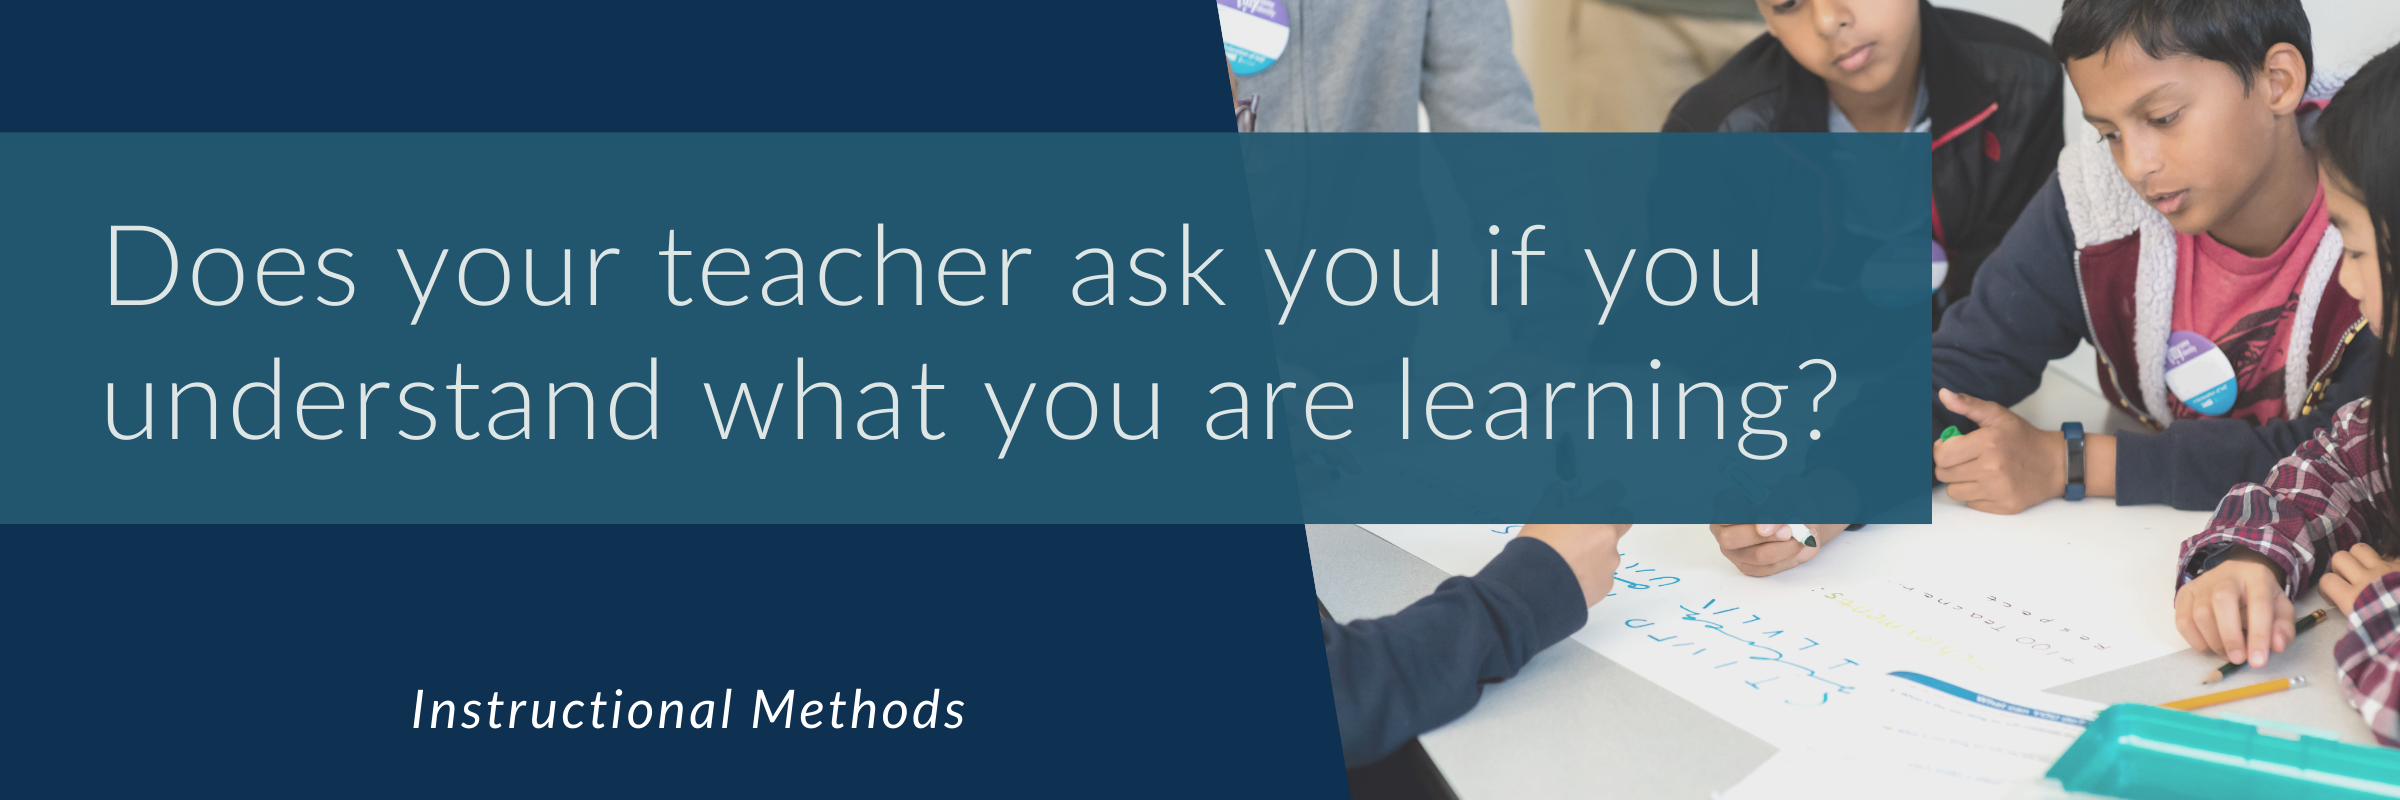 Does your teacher ask you if you understand what you are learning?